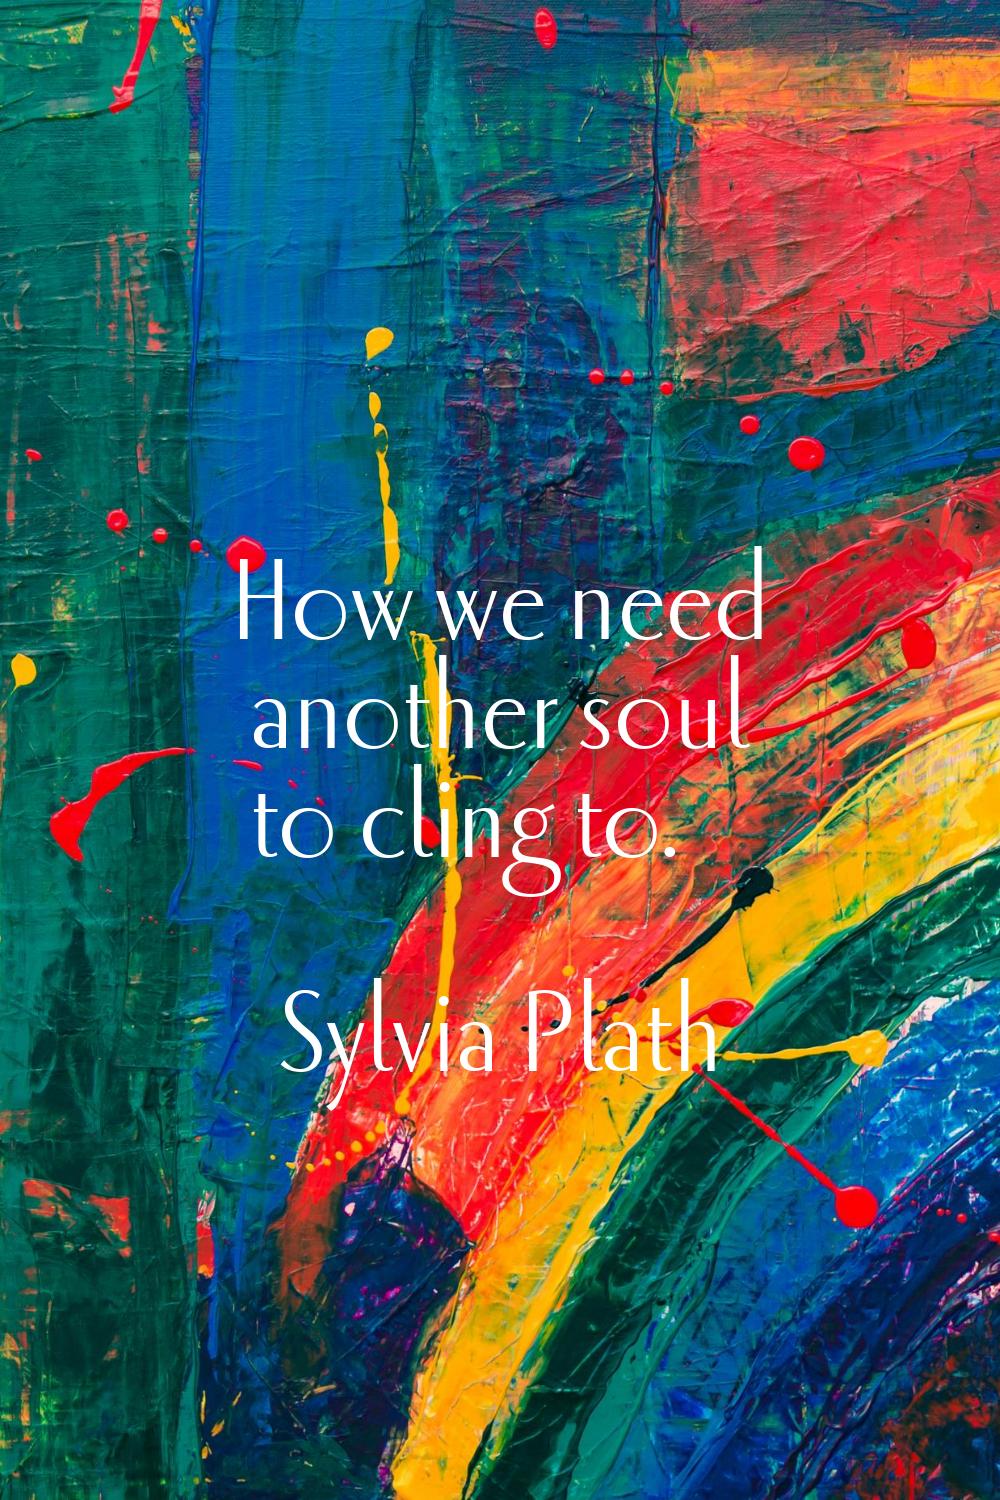 How we need another soul to cling to.